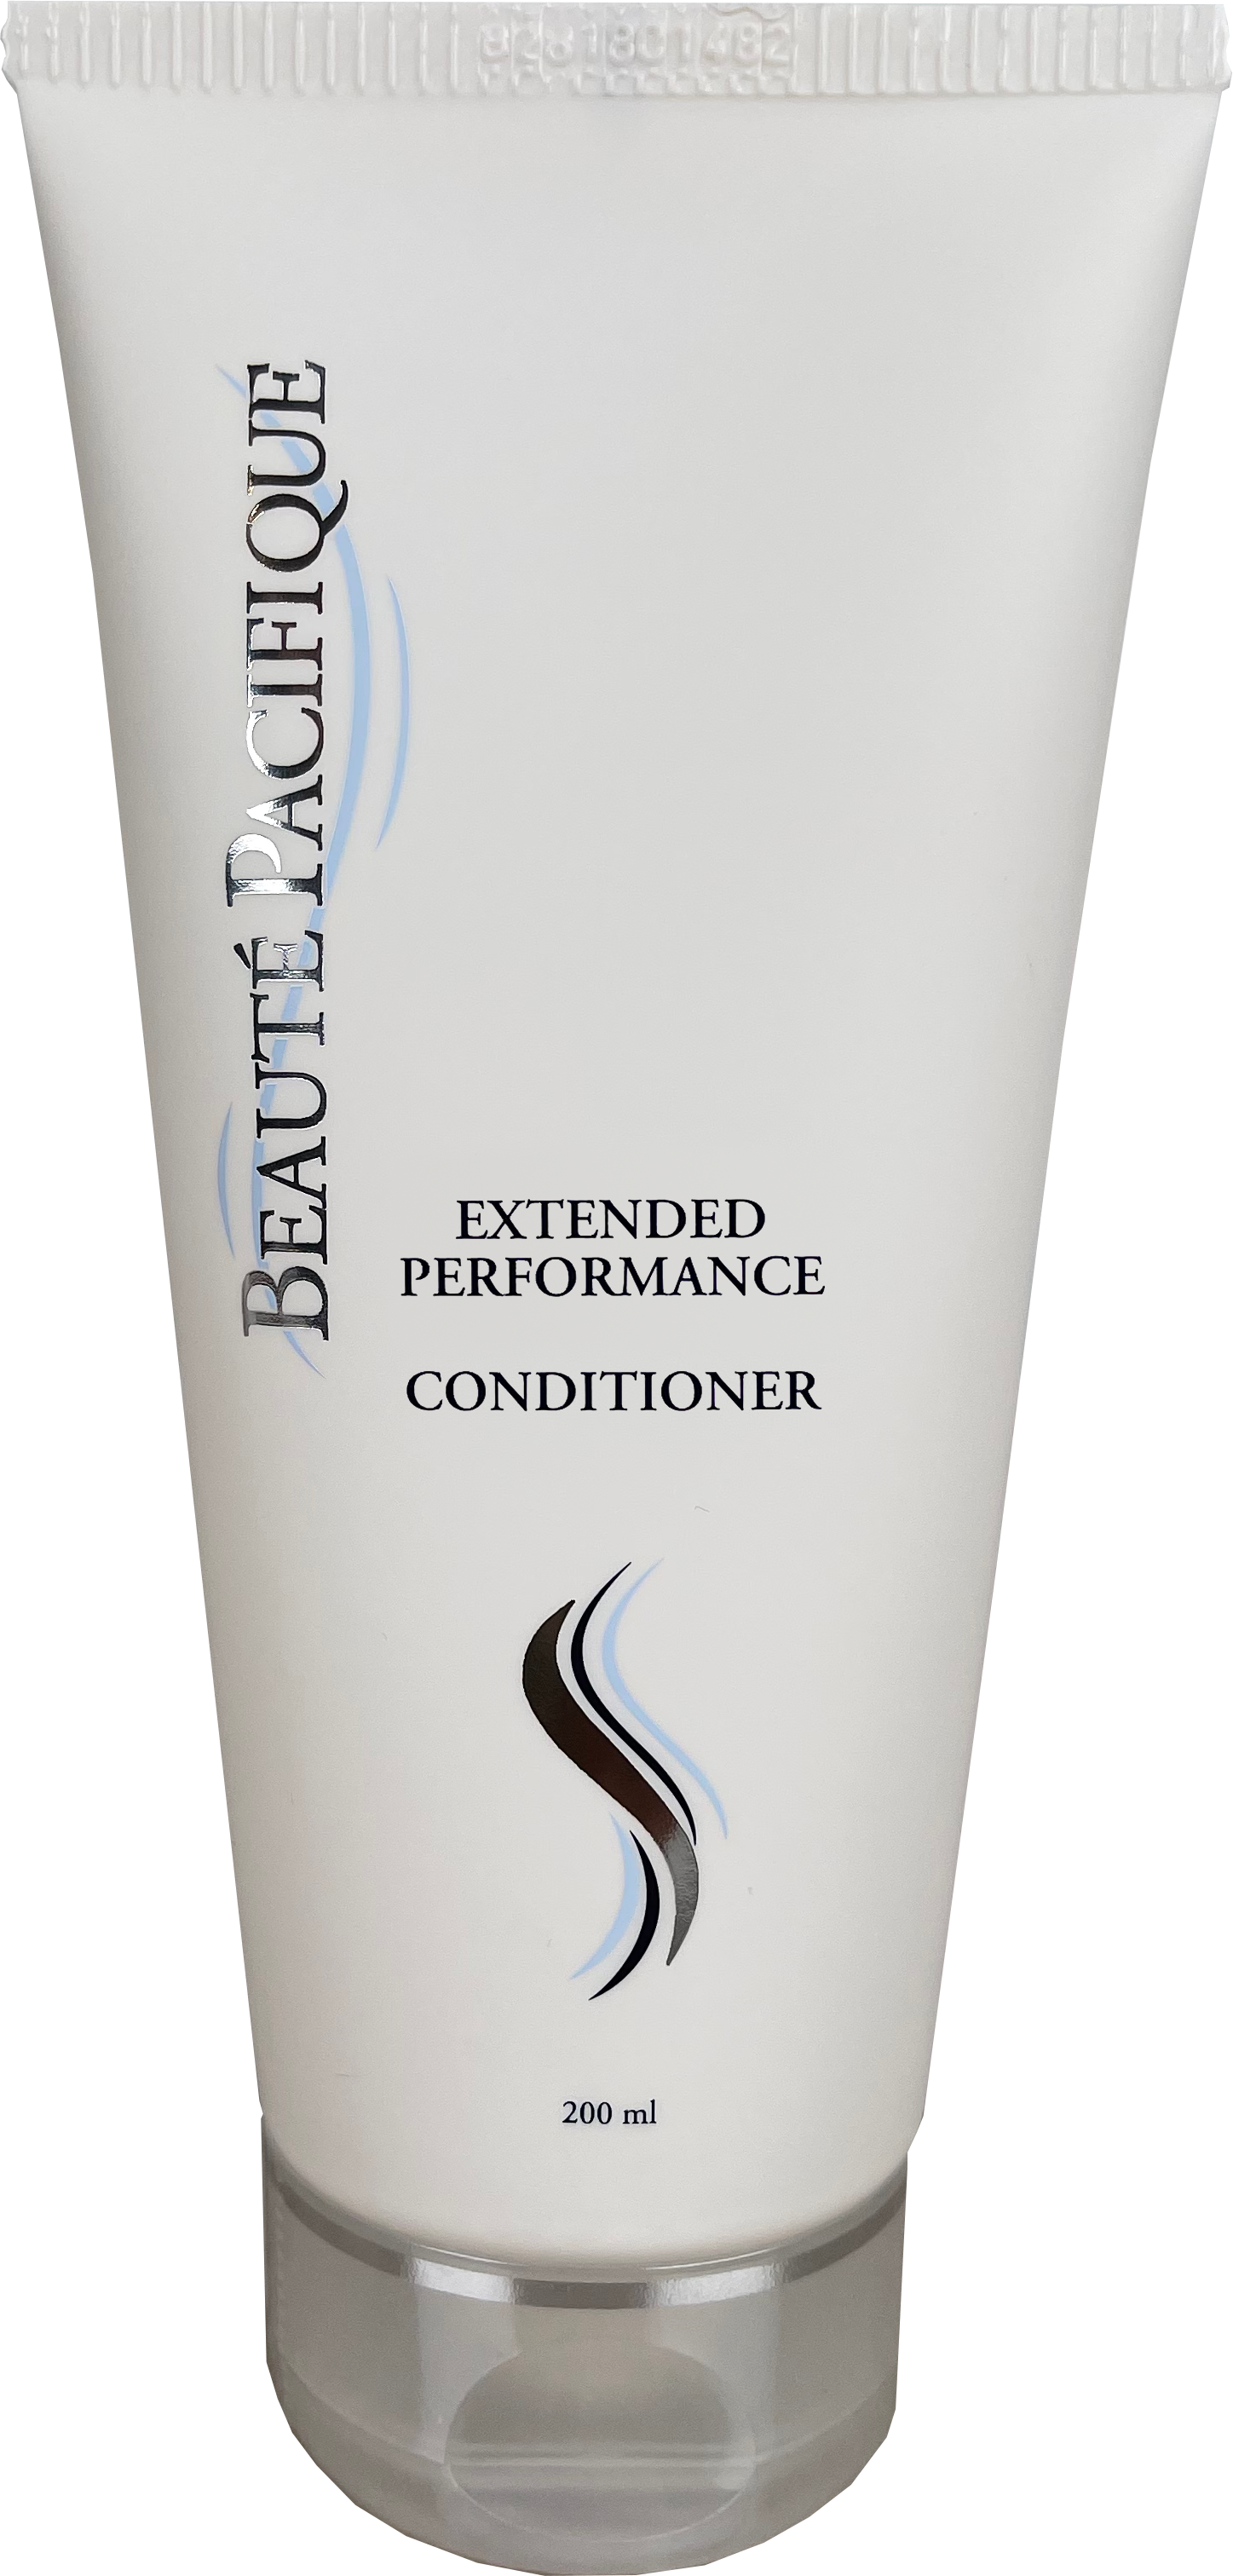  Extended Performance Conditioner